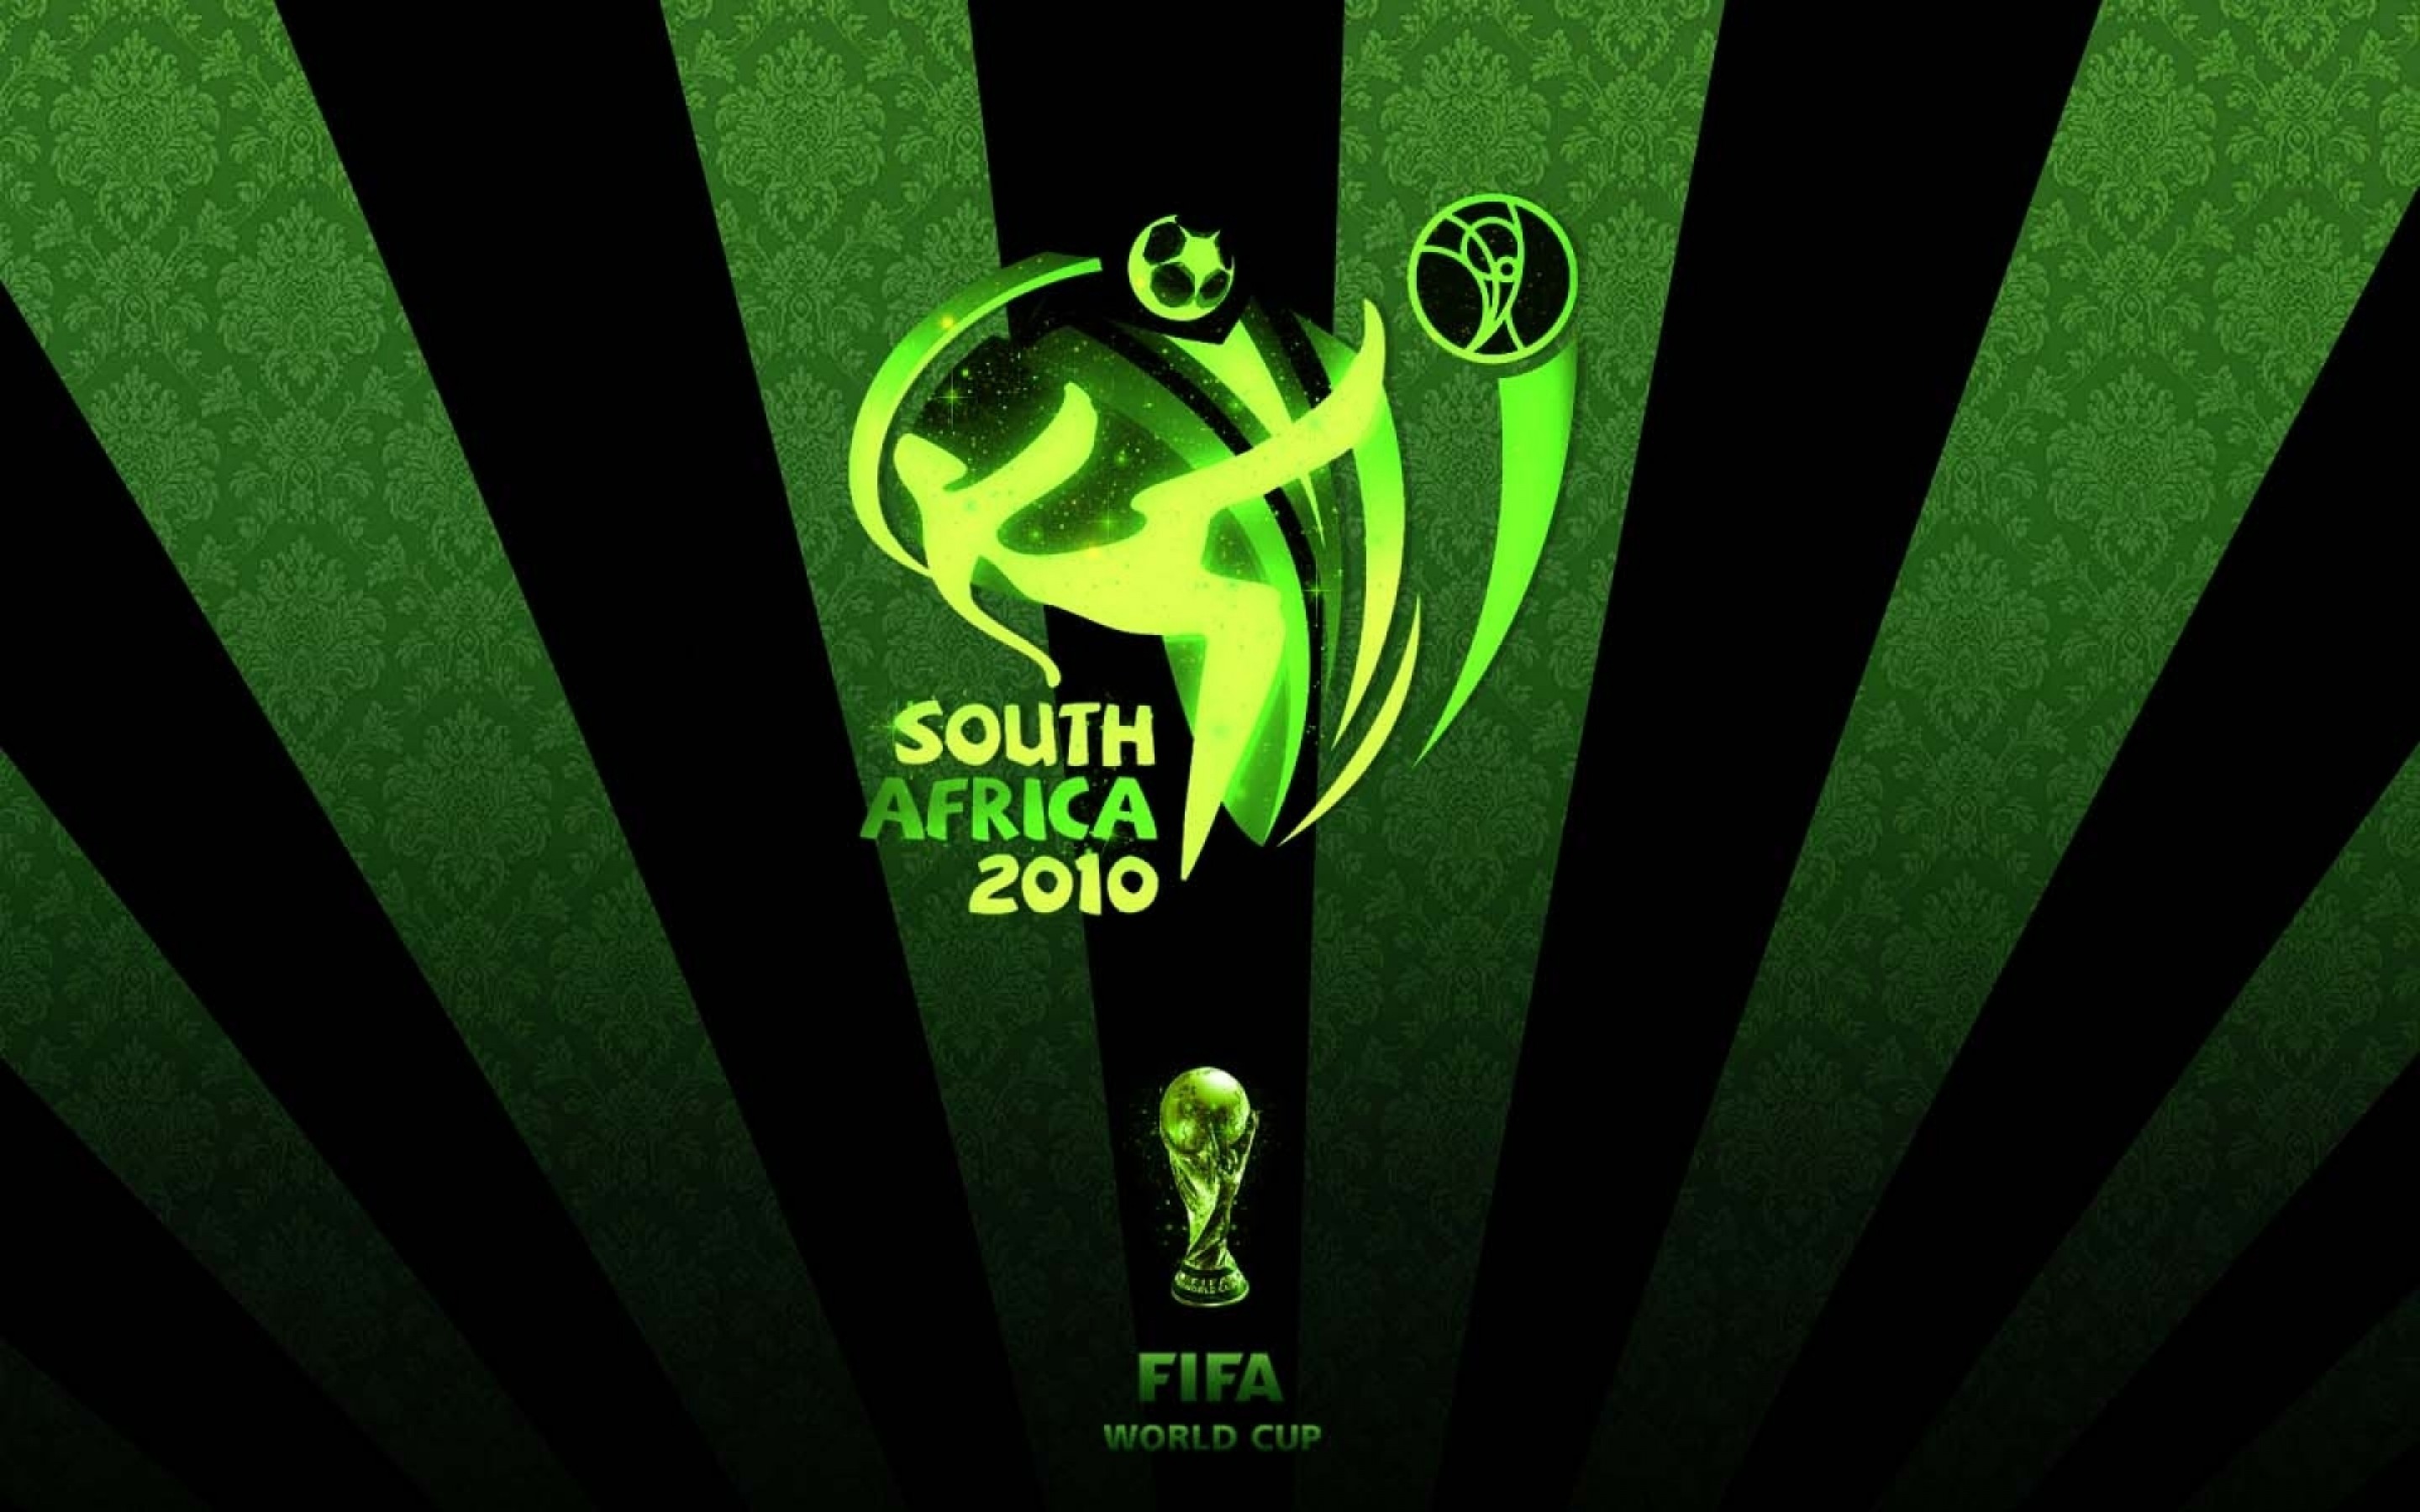 South Africa World Cup 2010 Hd Wallpaper